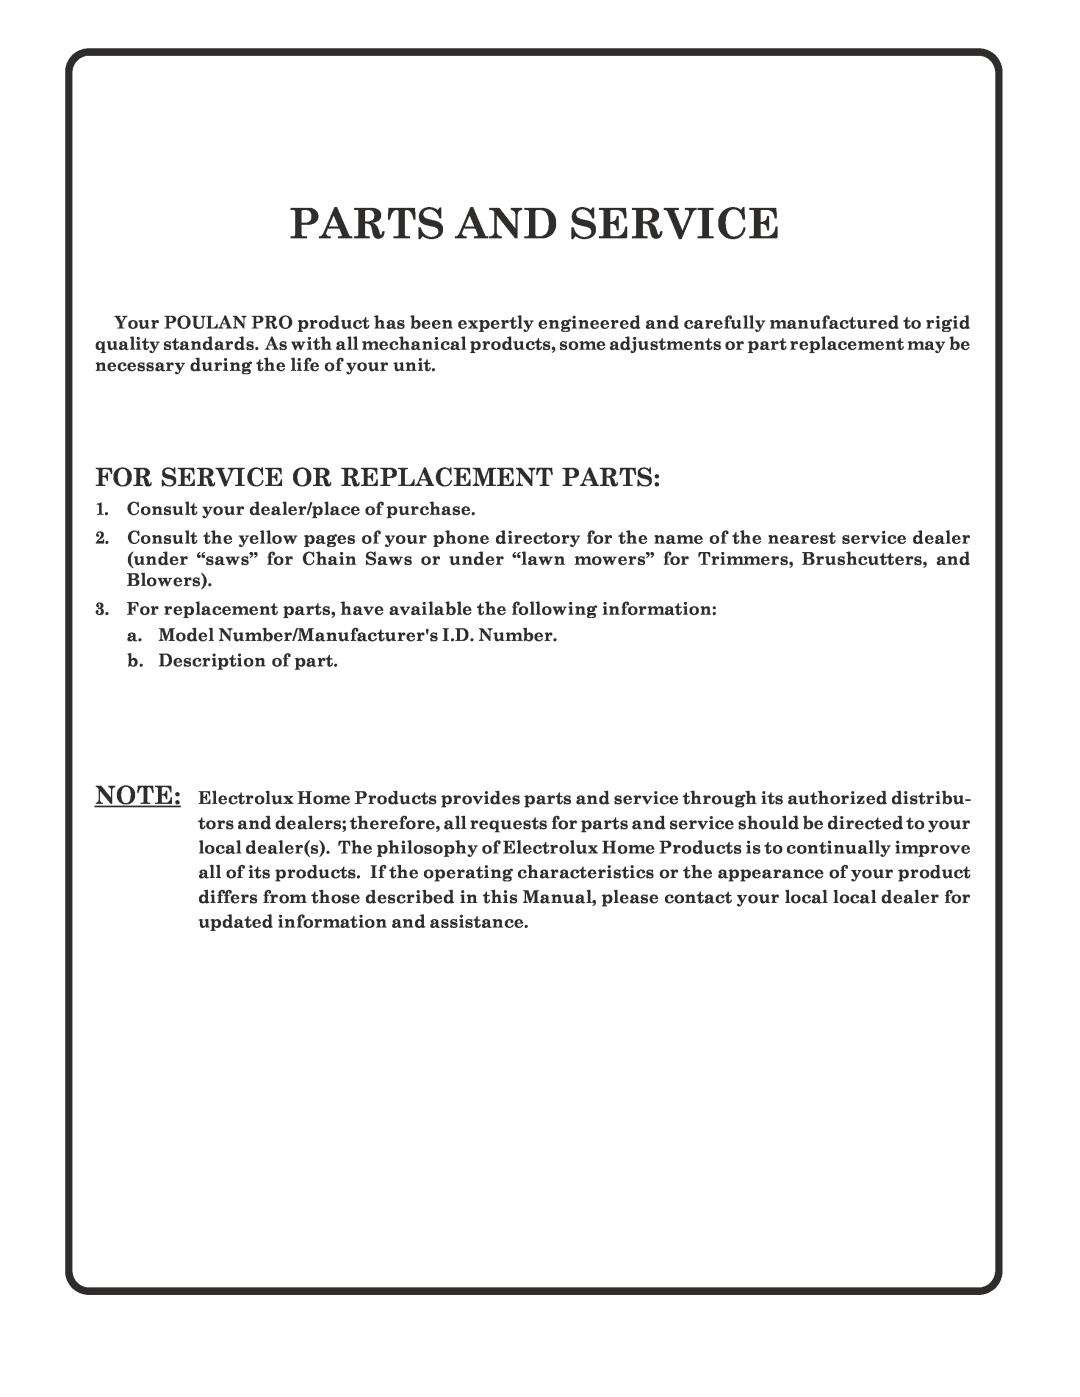 Poulan 183368 owner manual Parts And Service, For Service Or Replacement Parts 